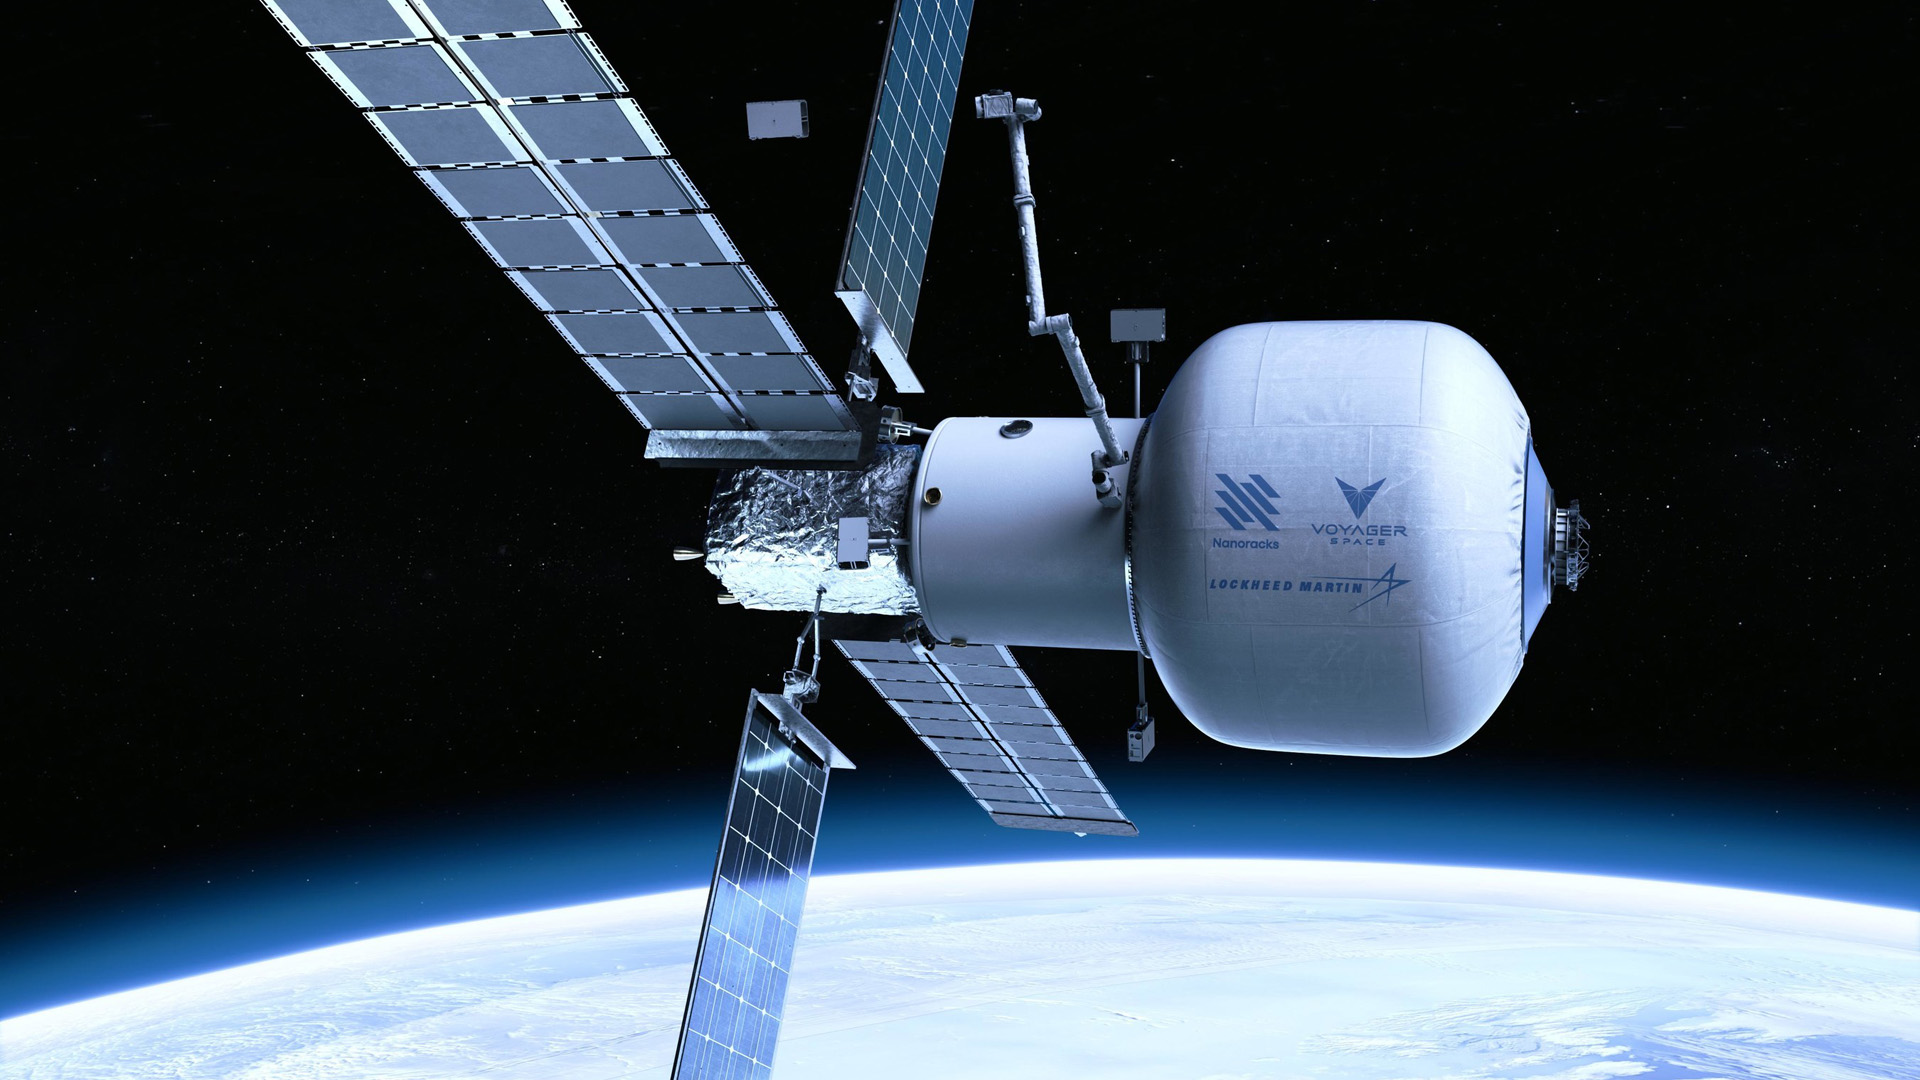 Voyager Space, Airbus & European Space Agency join consortium to build new International Space Agency - Featured image